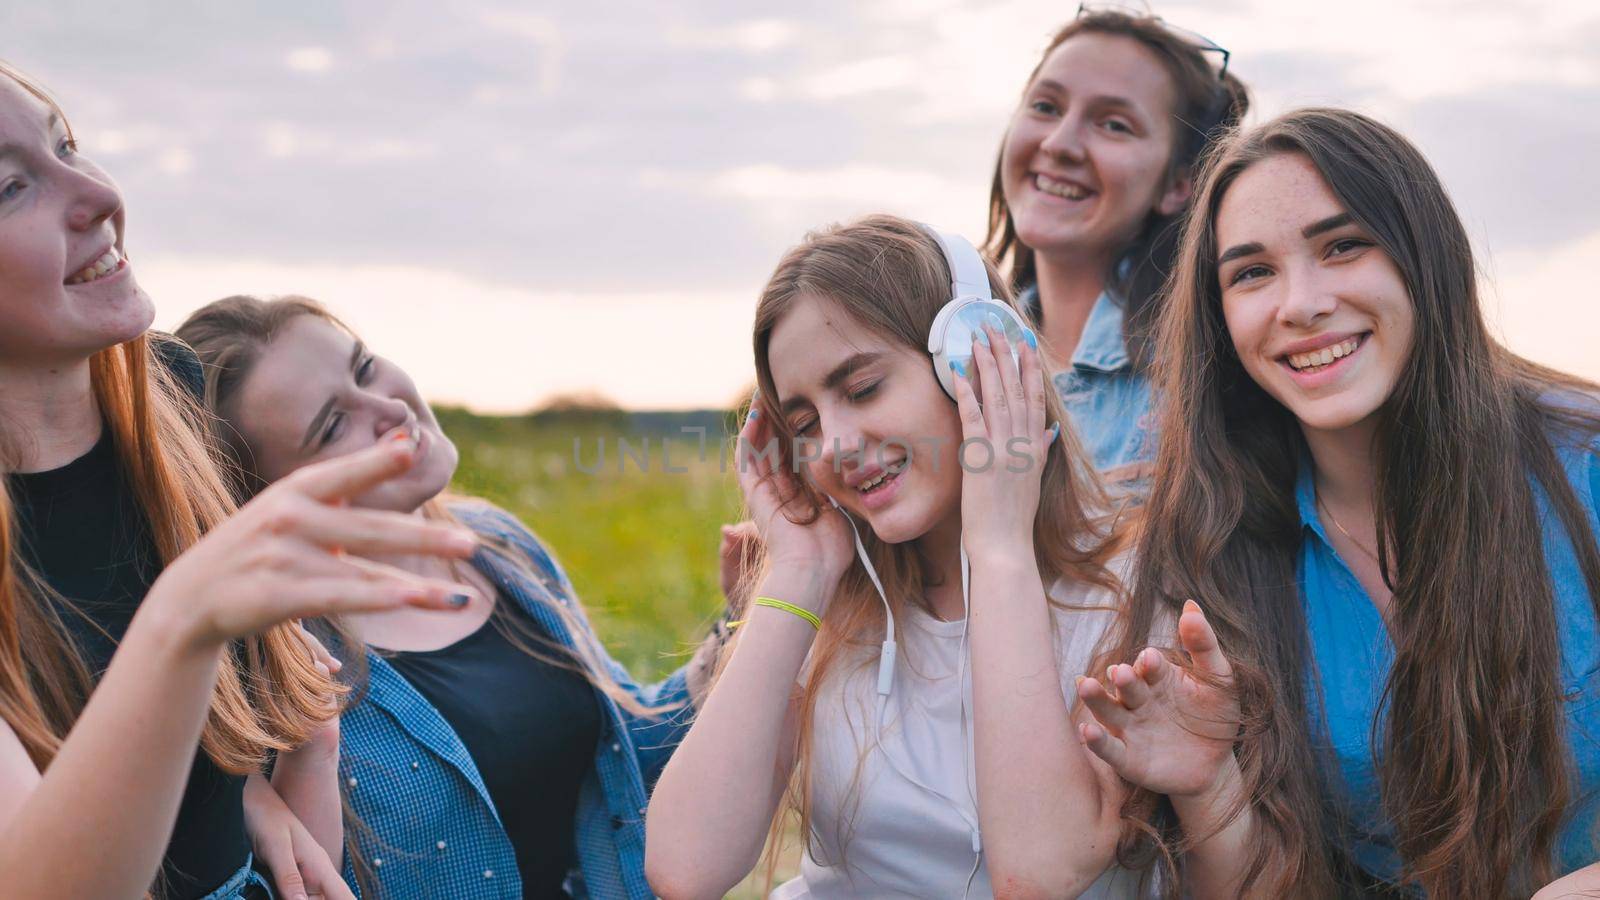 A group of girls of friends are listening to music on headphones and dancing to a friend